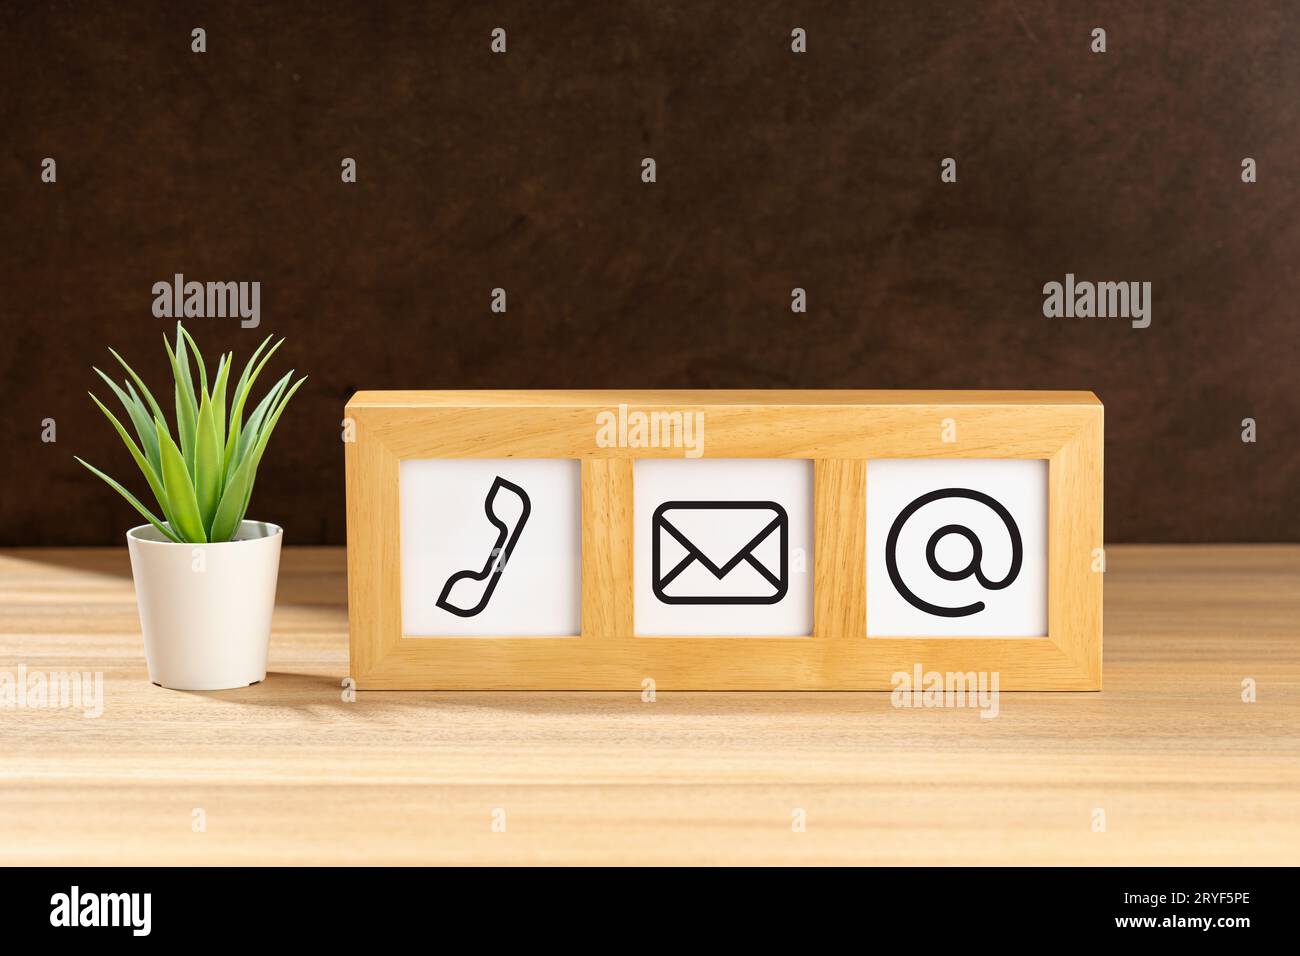 Contact us icons in modern wooden frame on desk. Brown textured wall. Copy space Stock Photo